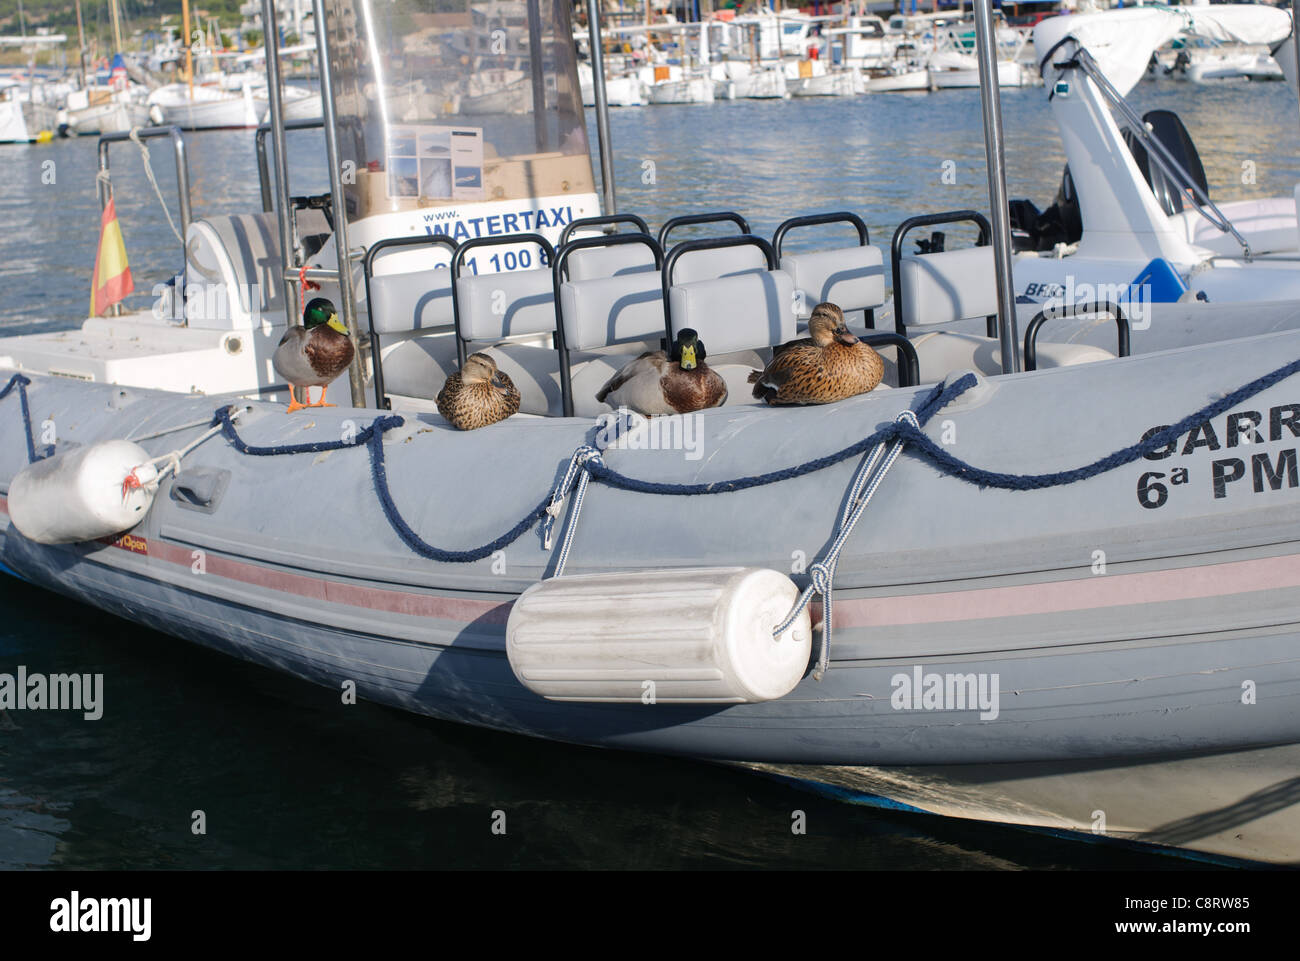 Ducks take a rest on the side of a watertaxi / boat in the harbour at Puerto De Andratx in Mallorca / Majorca Stock Photo